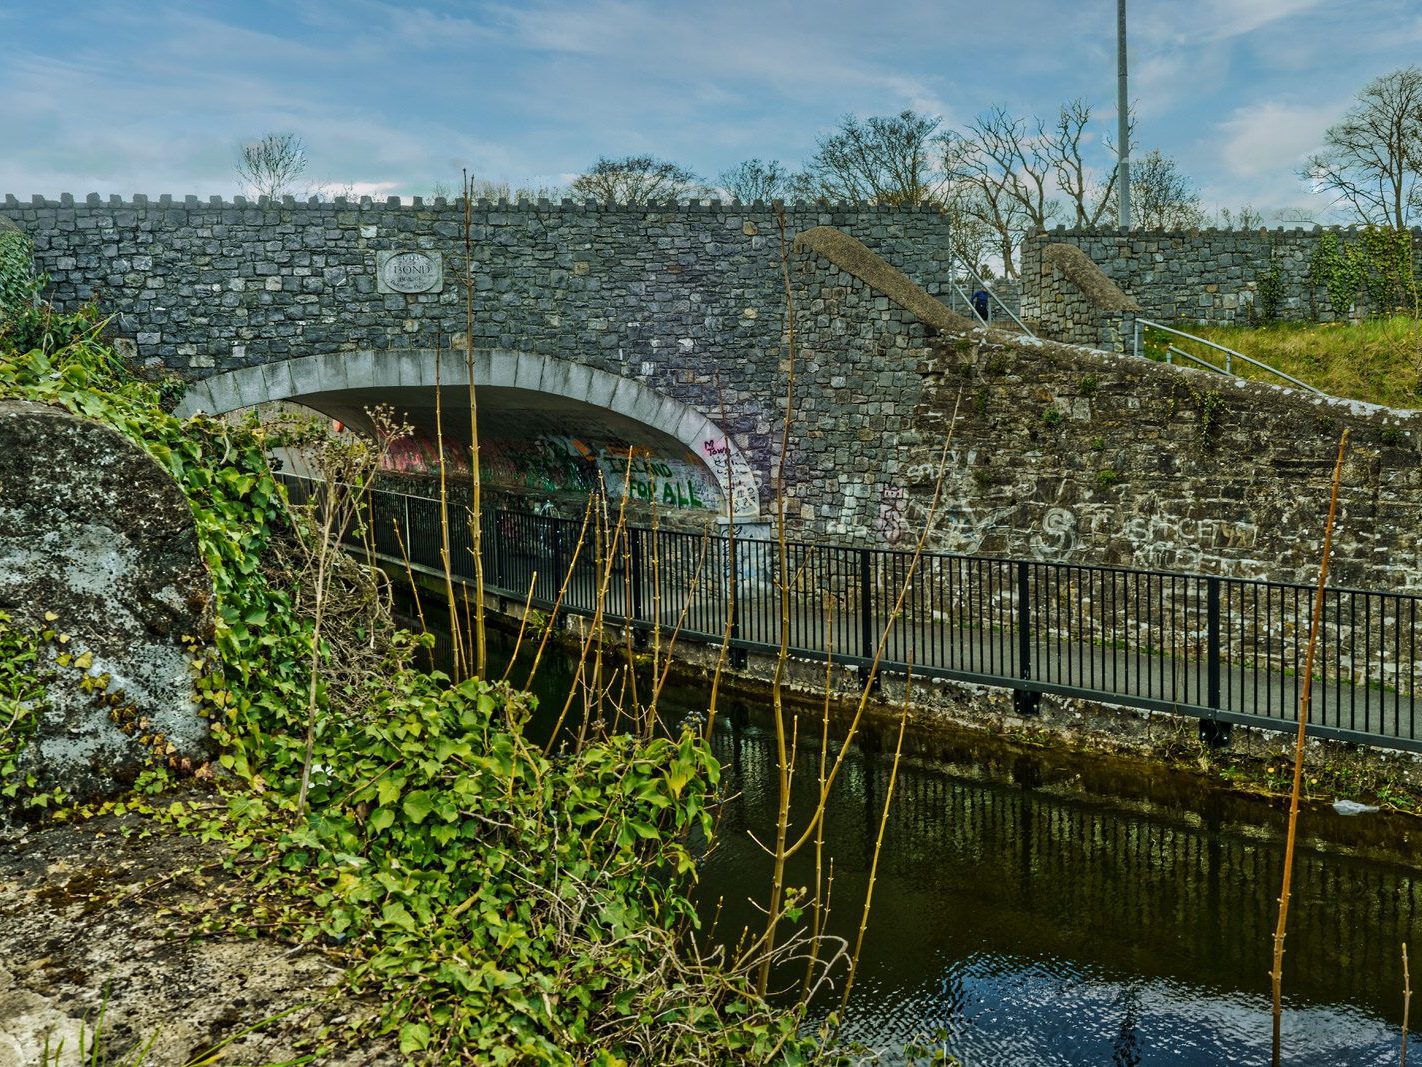 BOND BRIDGE ACROSS THE ROYAL CANAL IN MAYNOOTH [I WAS UNAWARE OF THIS BRIDGE UNTIL TODAY] 022